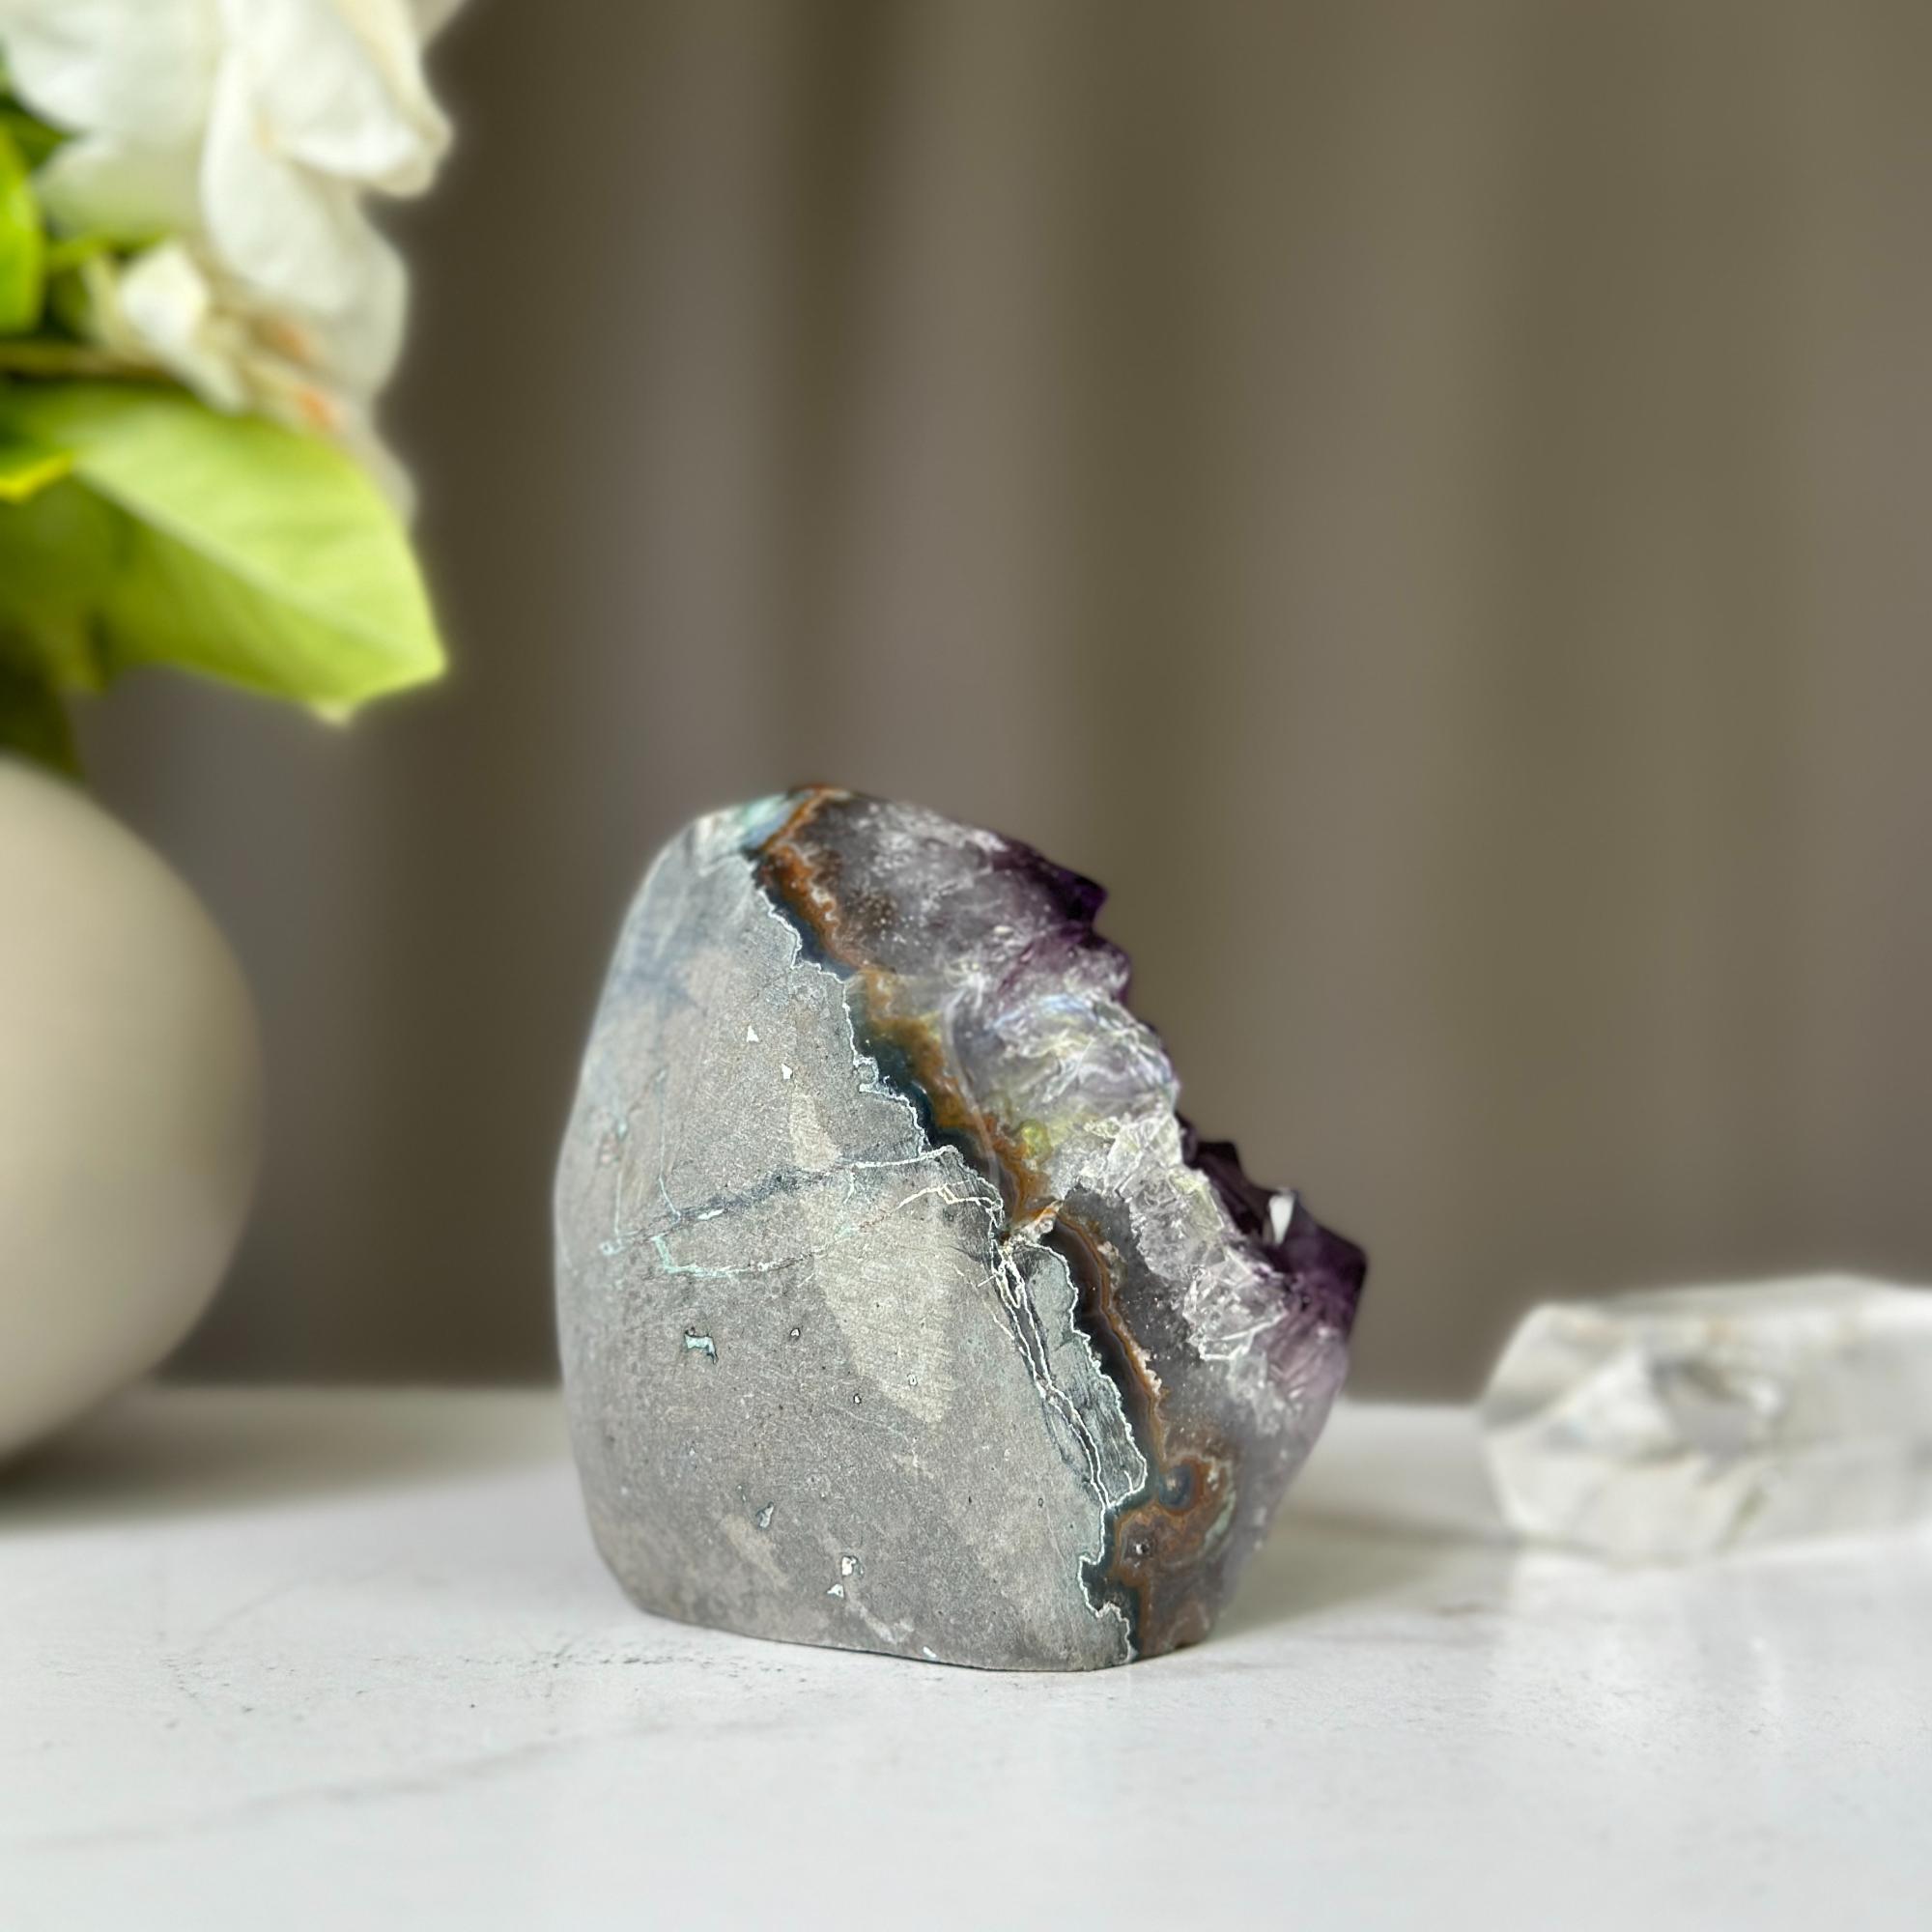 Unique Amethyst Cluster with Agate and Jasper formations, February birthstone, Meditation crystals, Amethyst Geode